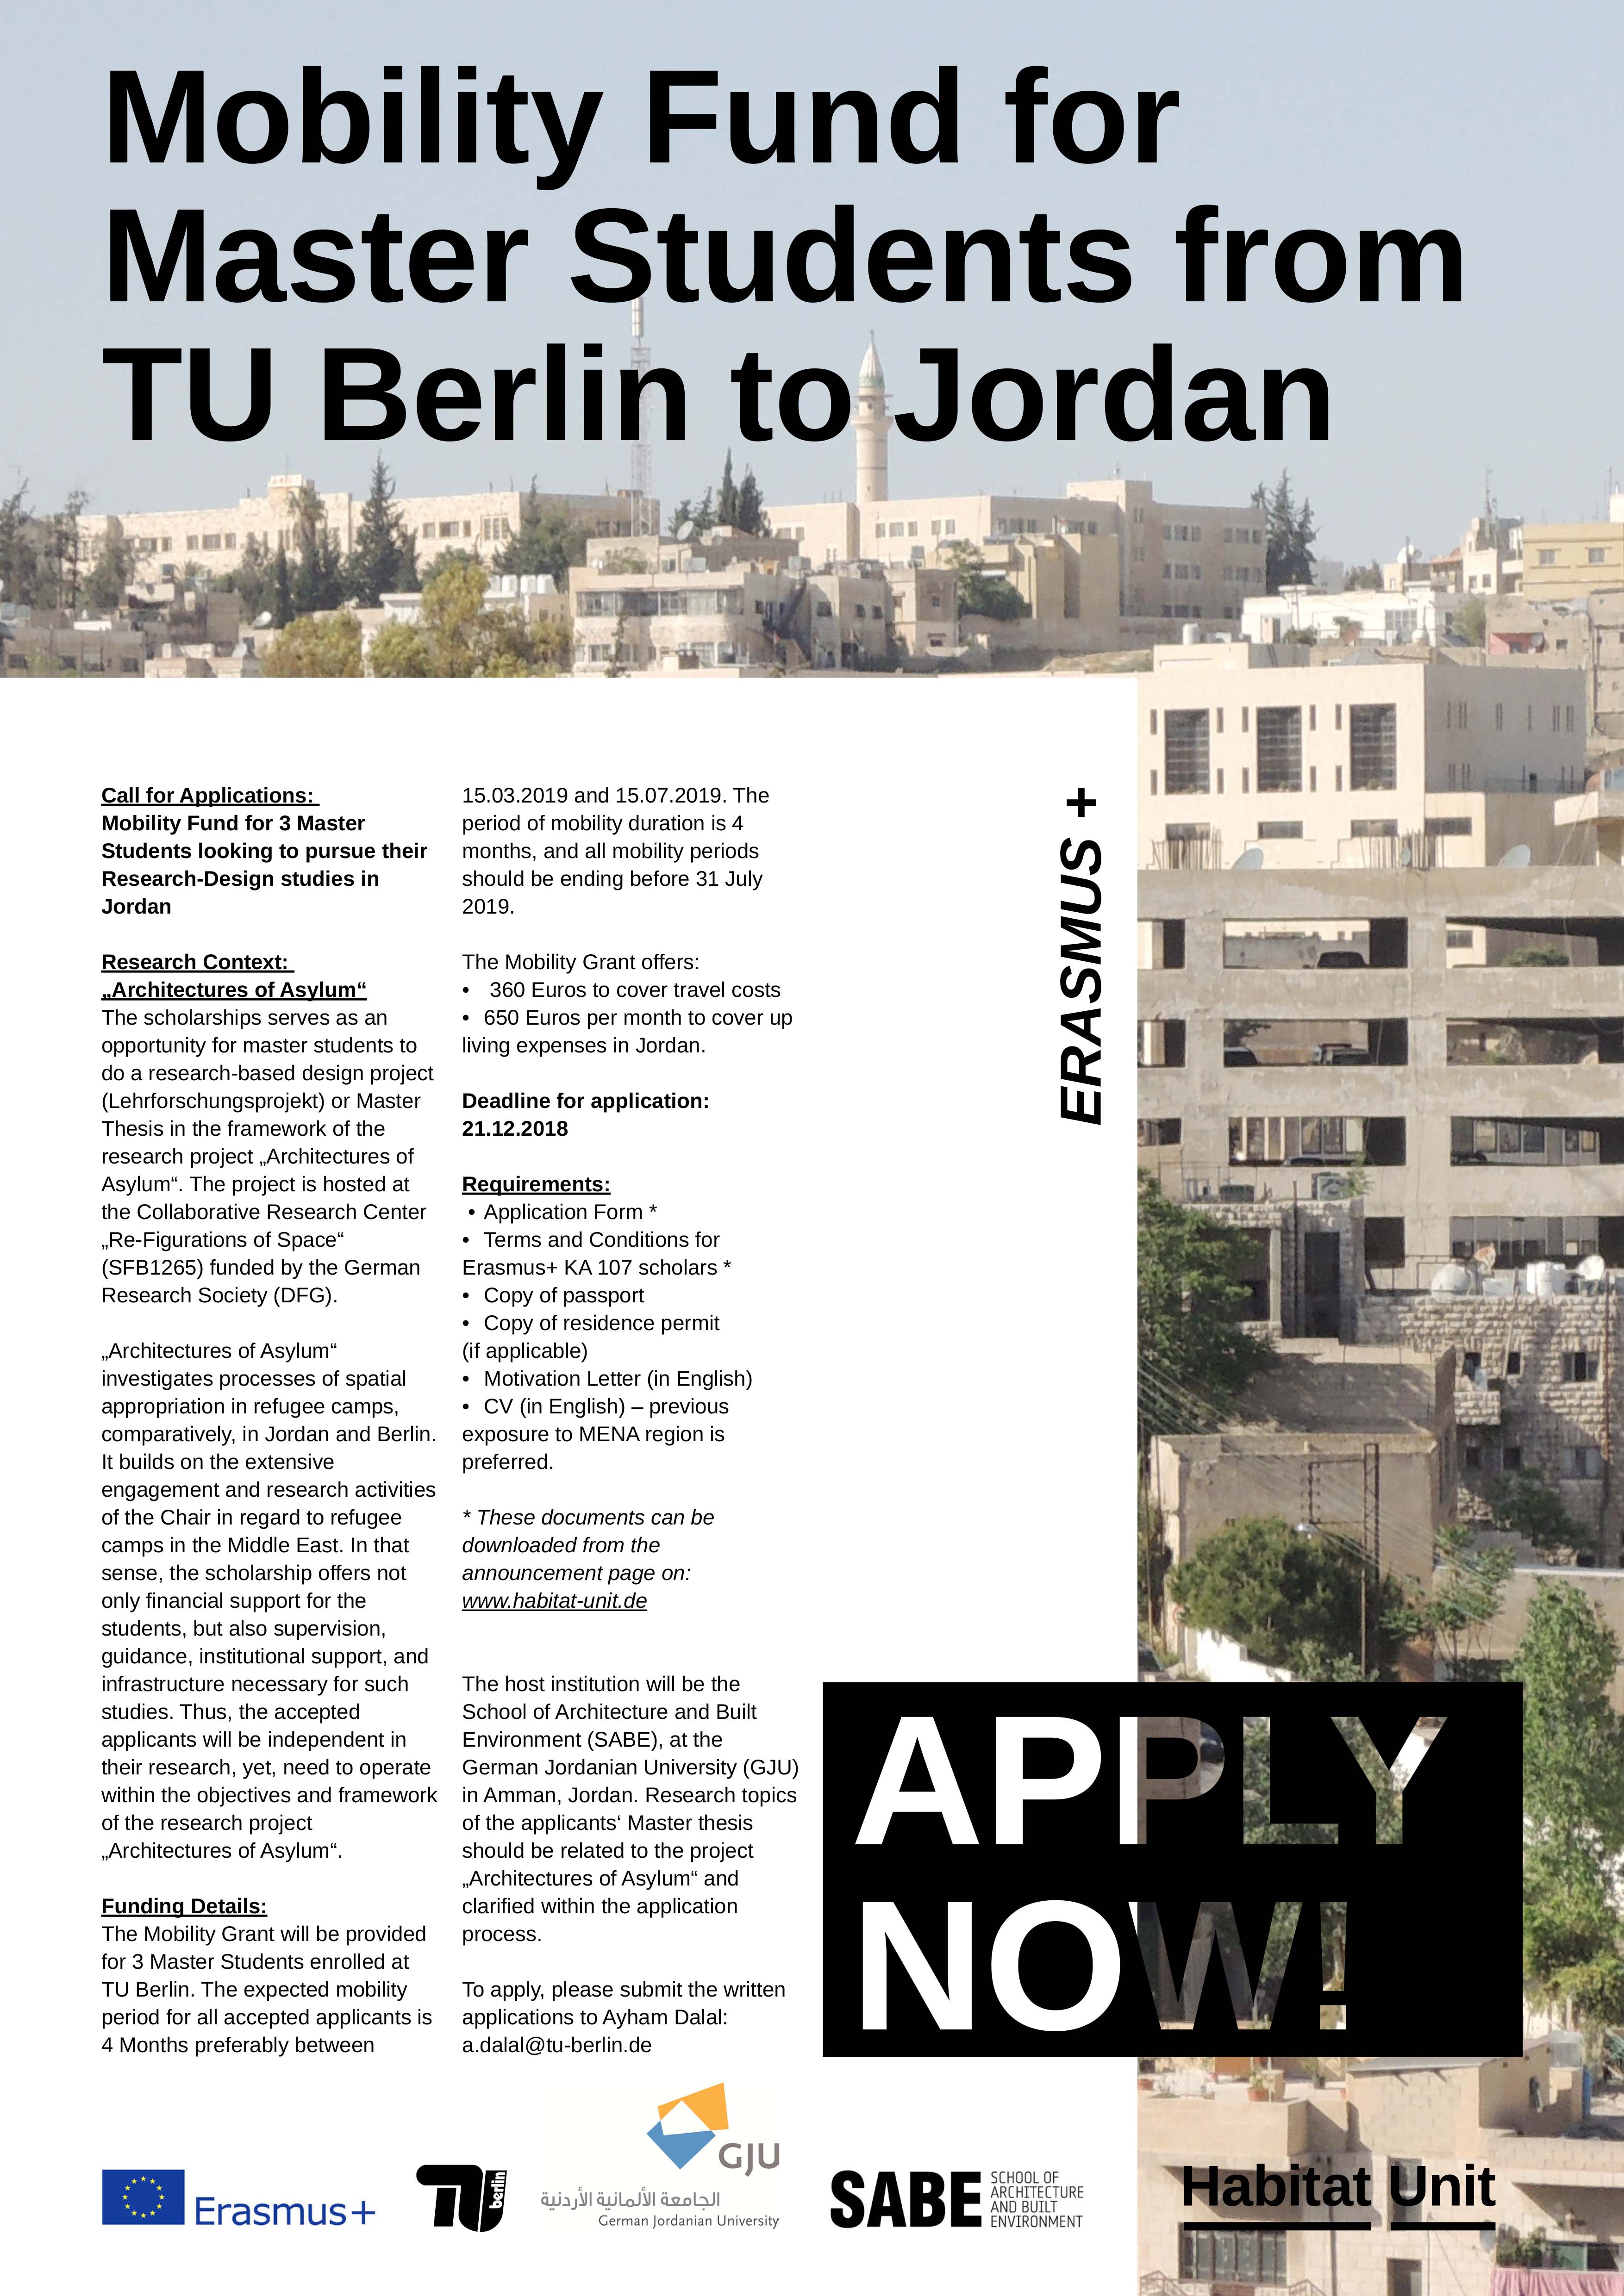 Mobility Fund for Master Students from TU Berlin to Jordan